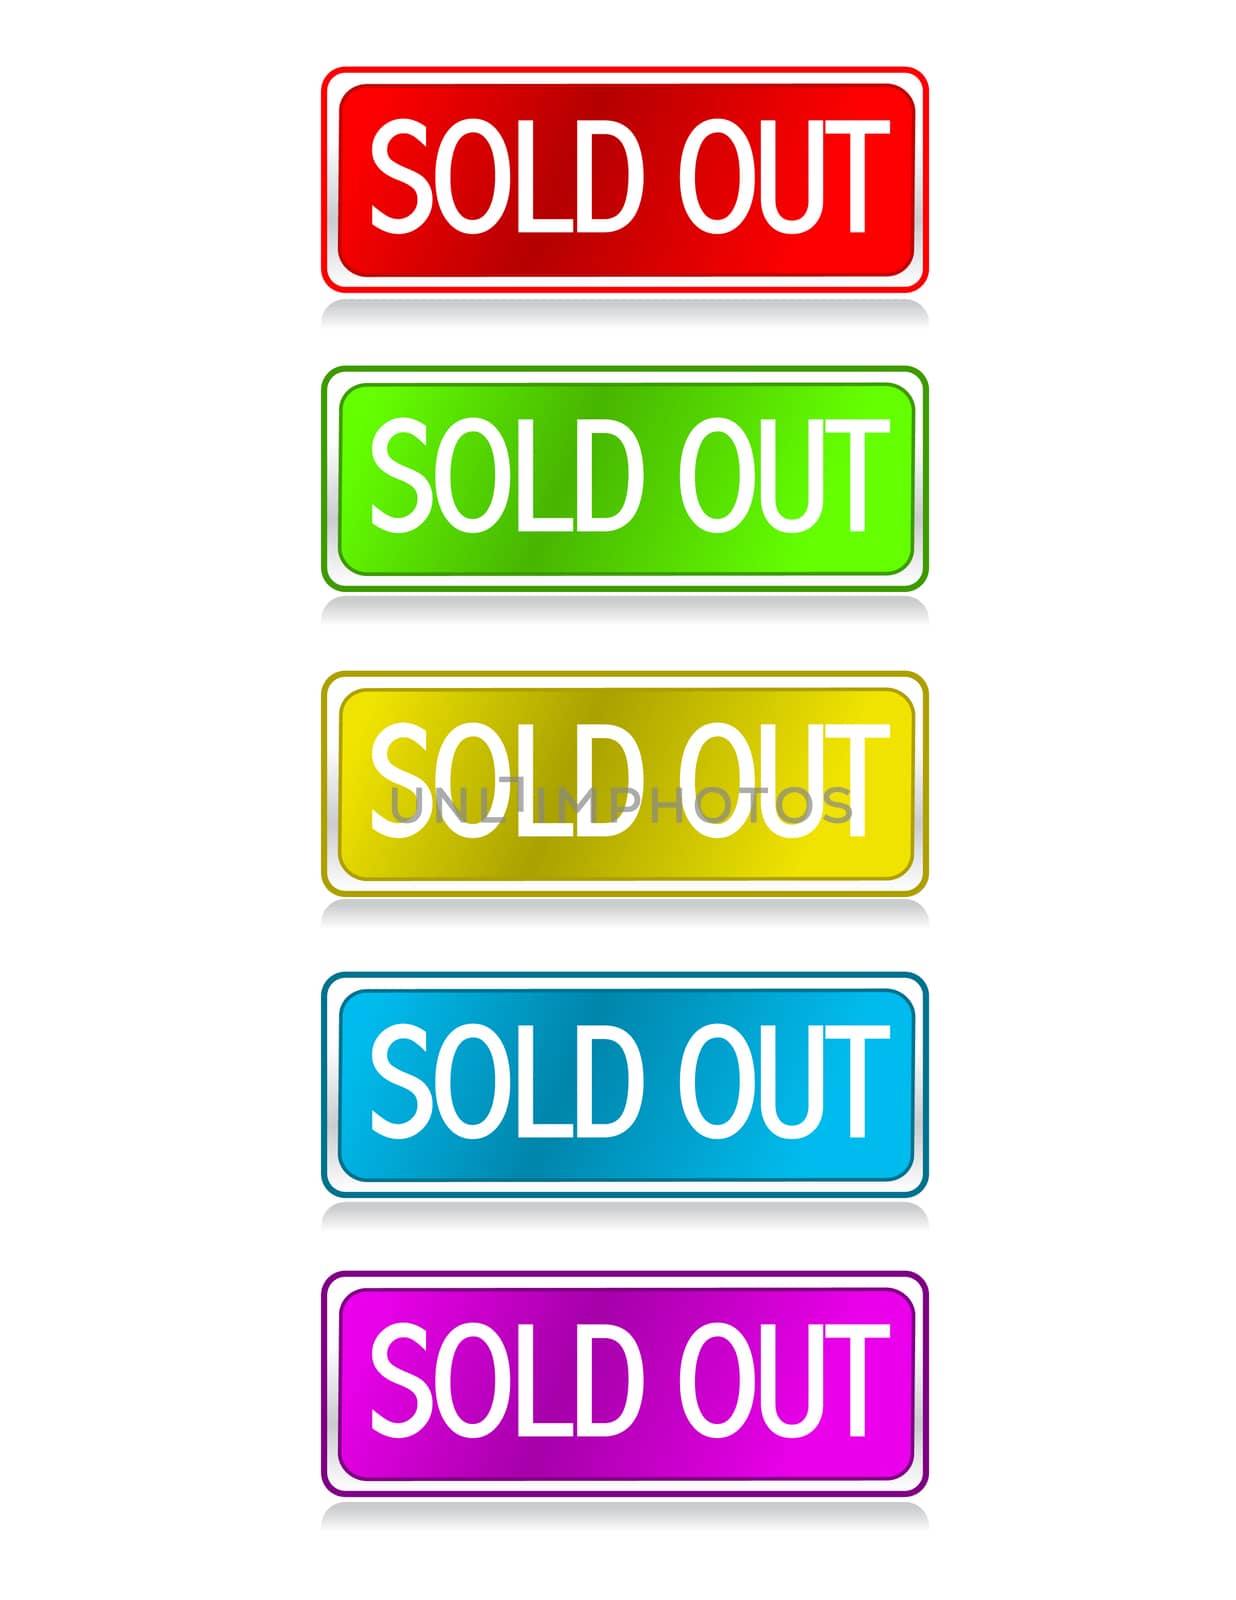 Different color Sold out buttons isolated over a white background